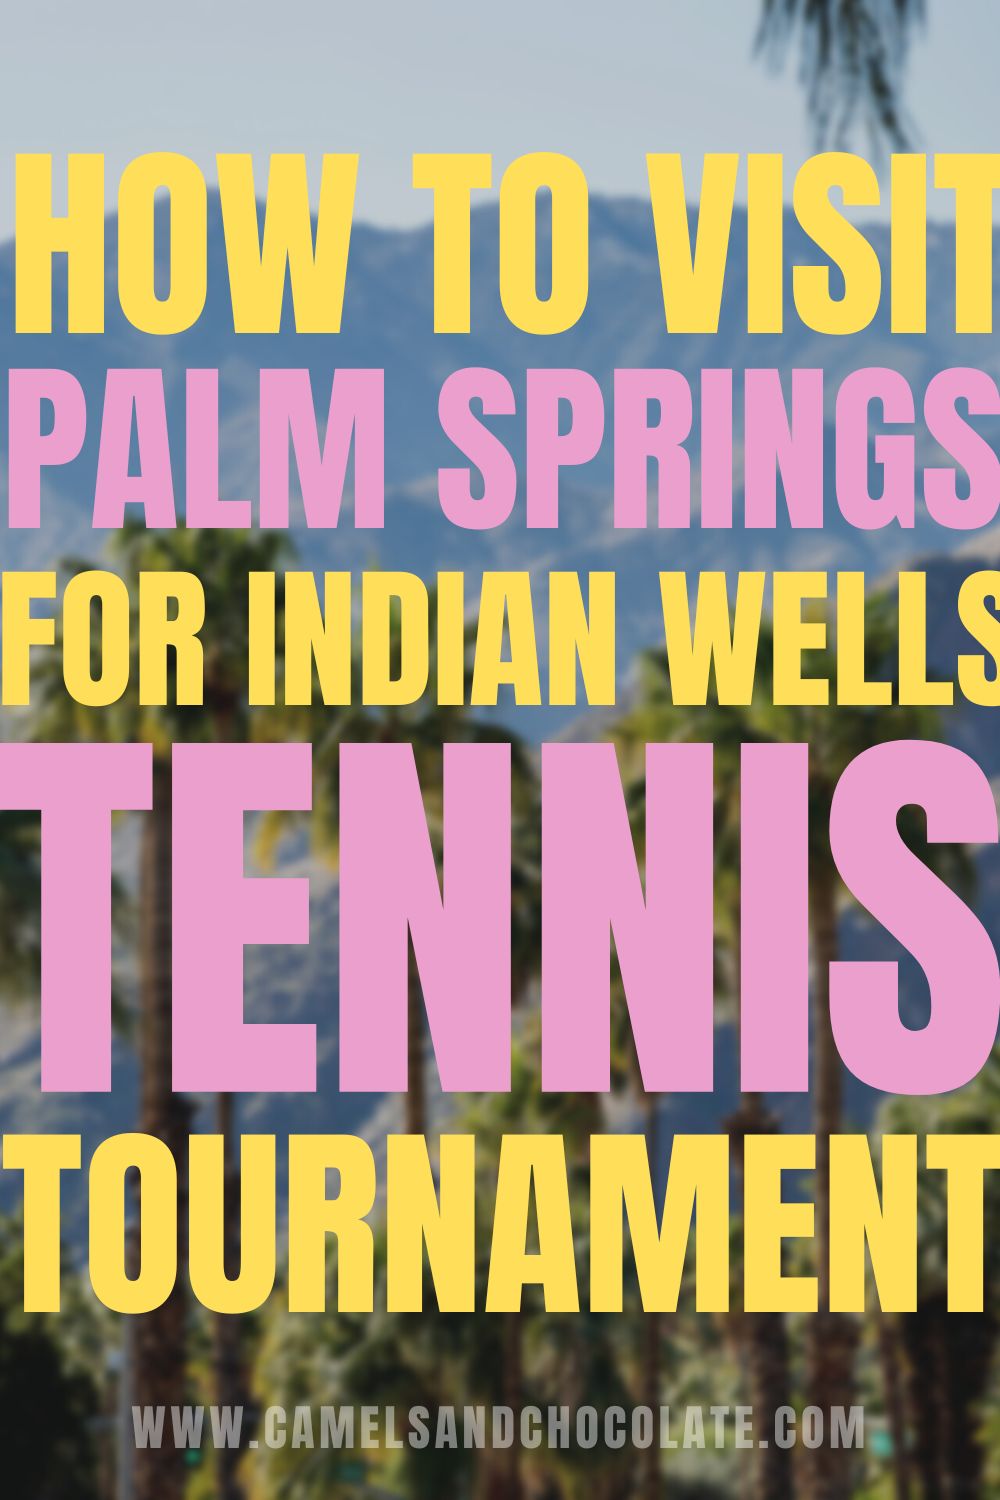 How to Plan a Trip to Indian Wells Tennis Tournament